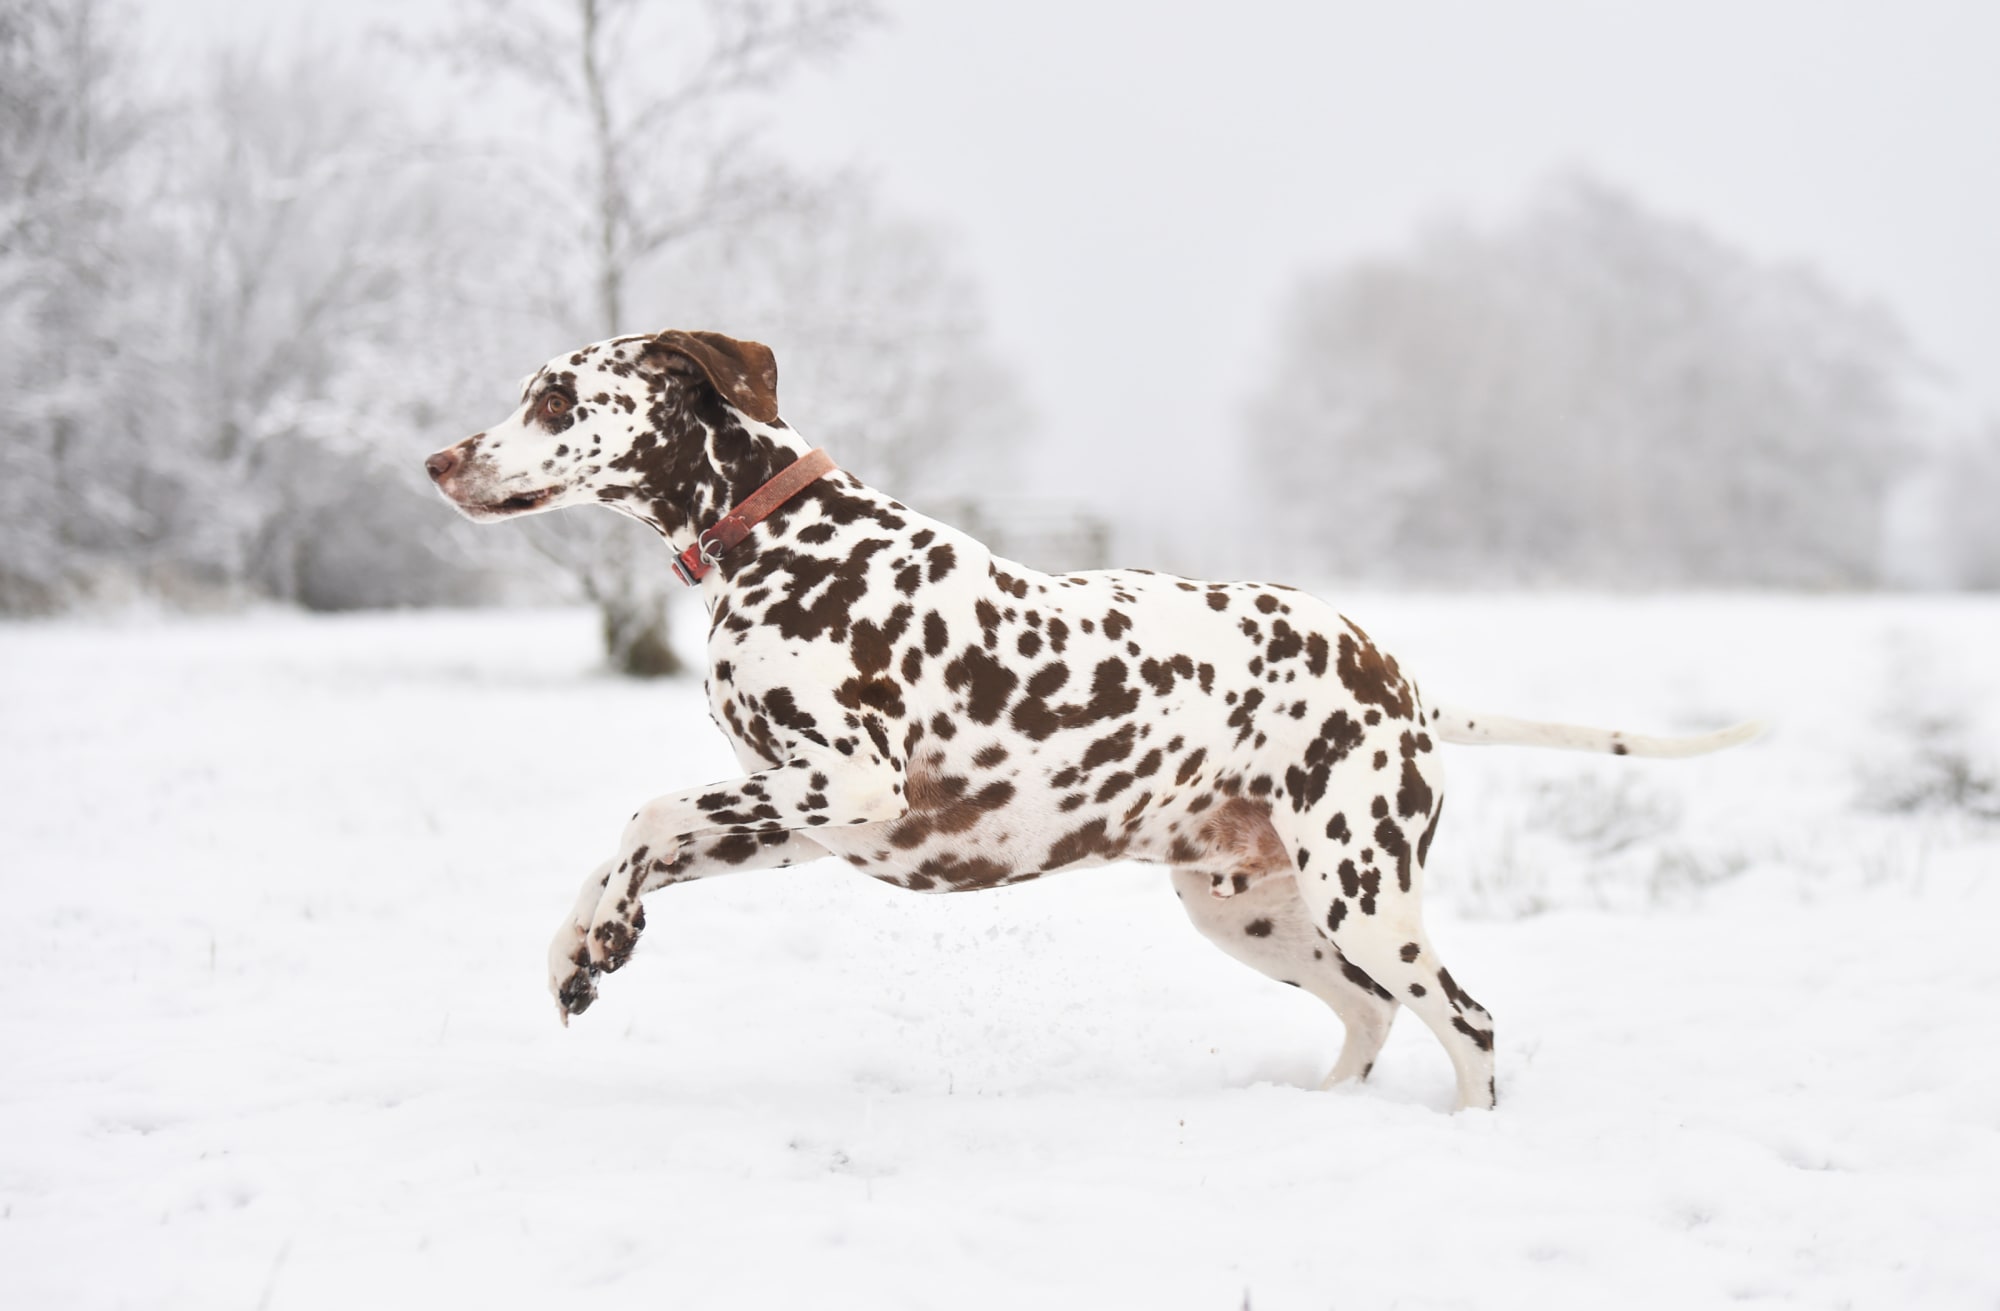 what owning a dalmatian says about you?